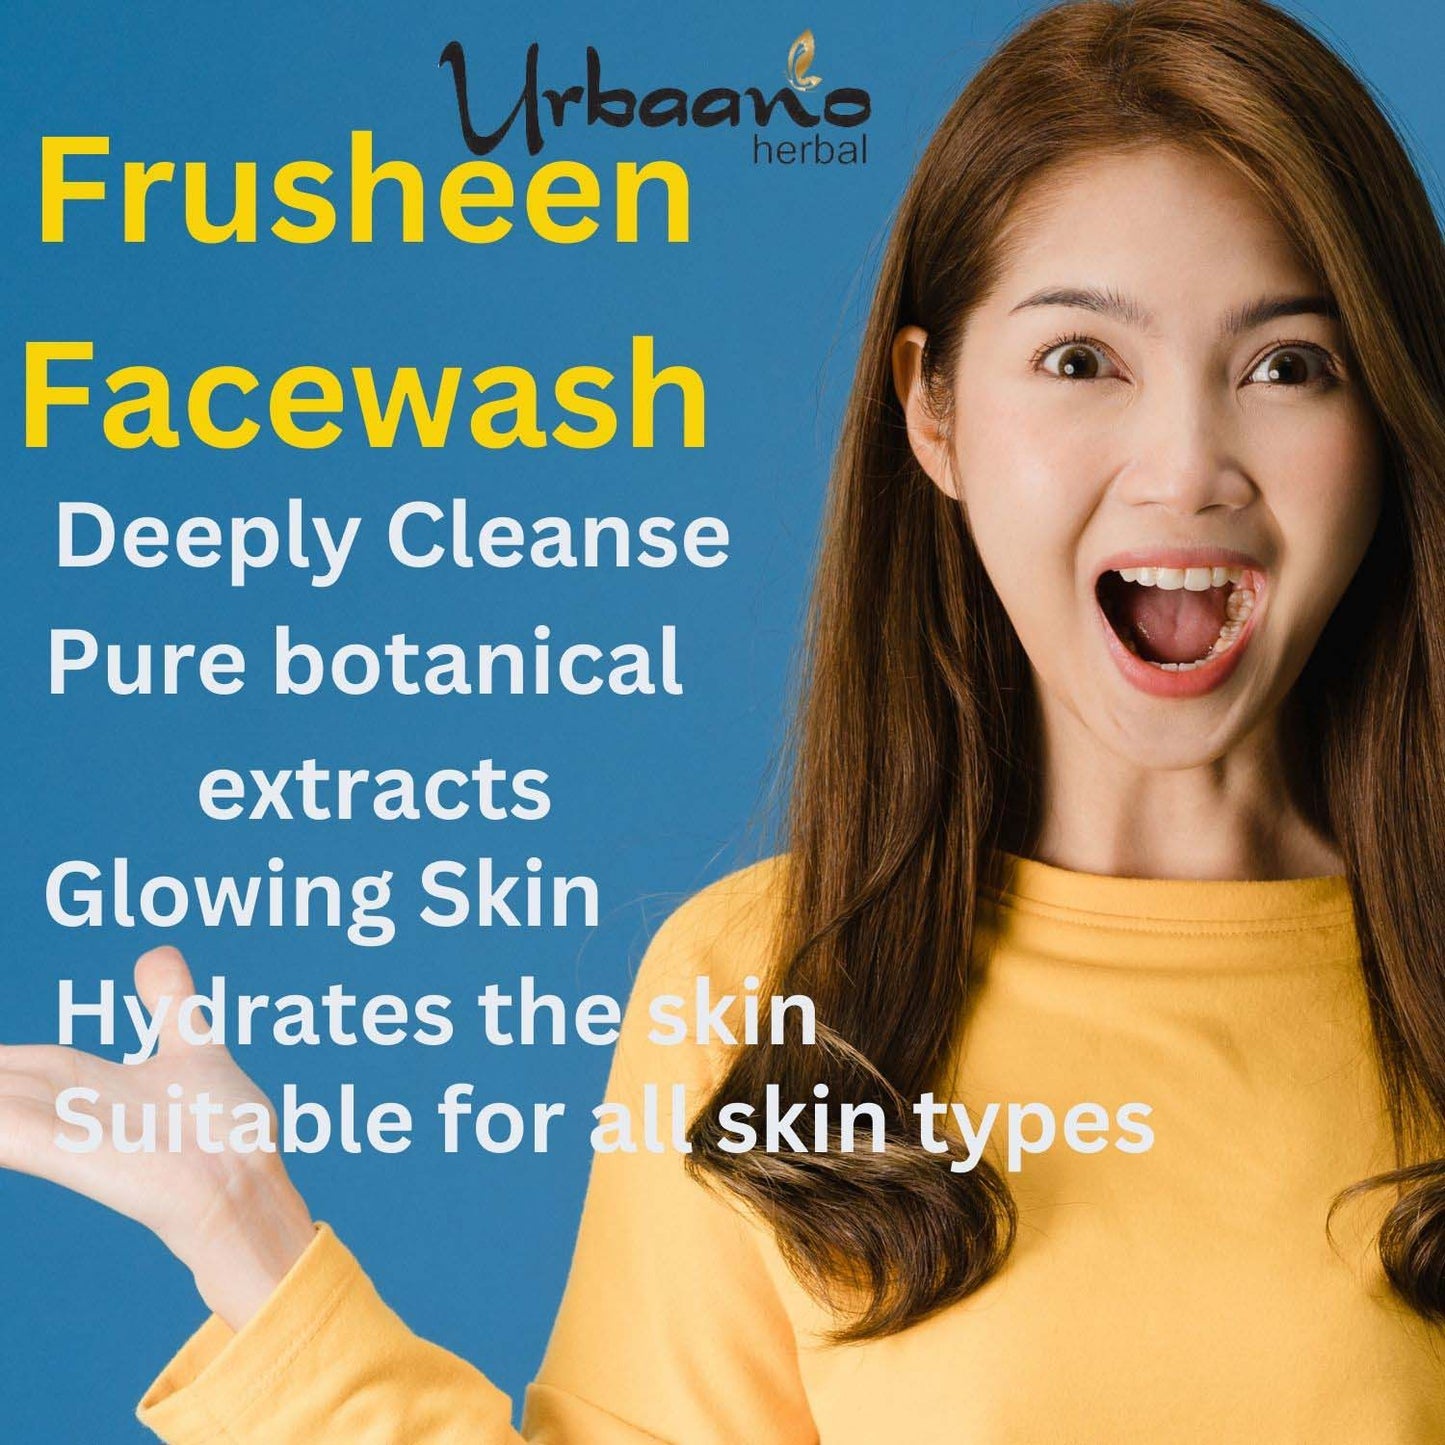 urbaano herbal frusheen face wash full of natural & pure extracts . oils, no chemical, sulphates, parabens